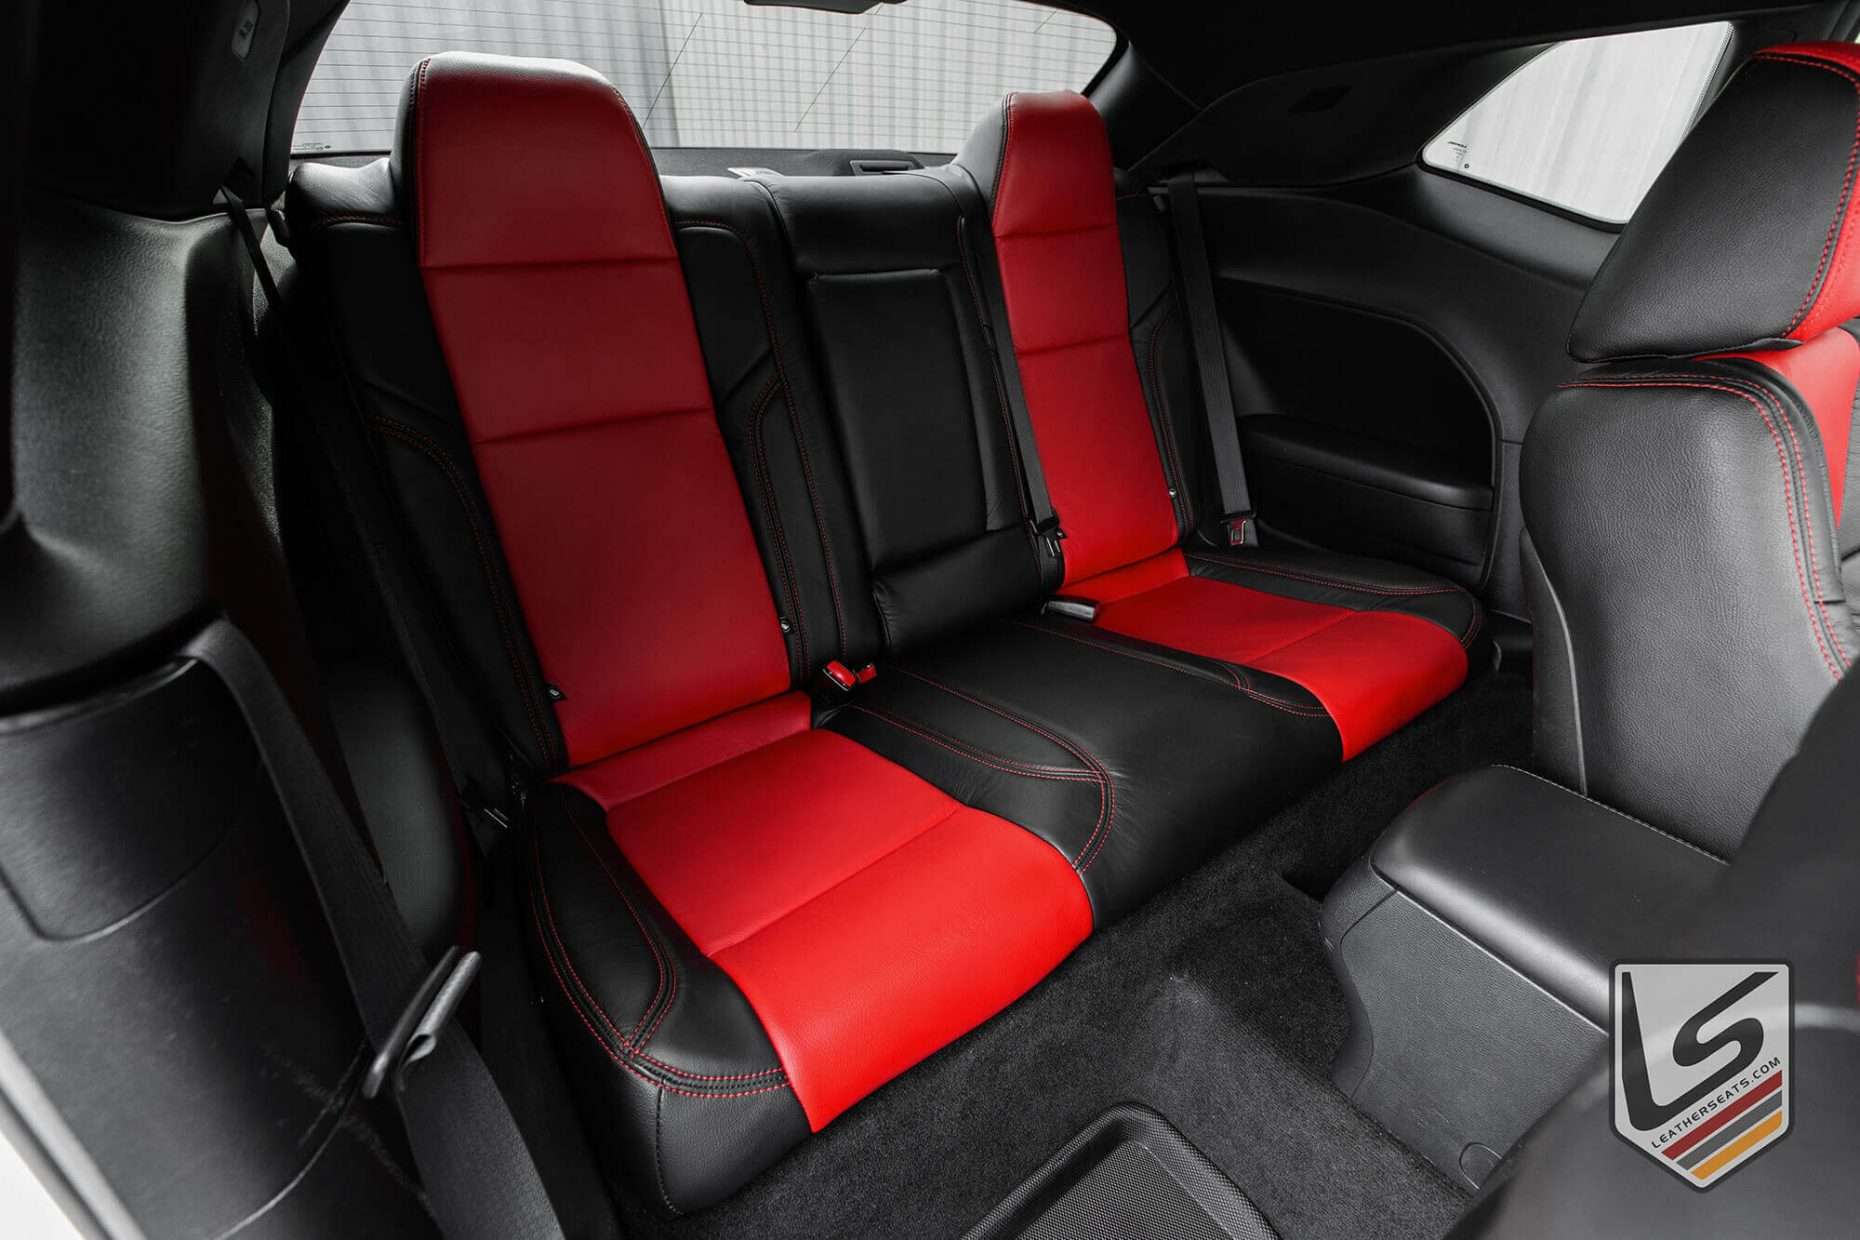 2015-2022 Dodge Challenger with Black and Bright Red leather seats - Rear seats from passenger